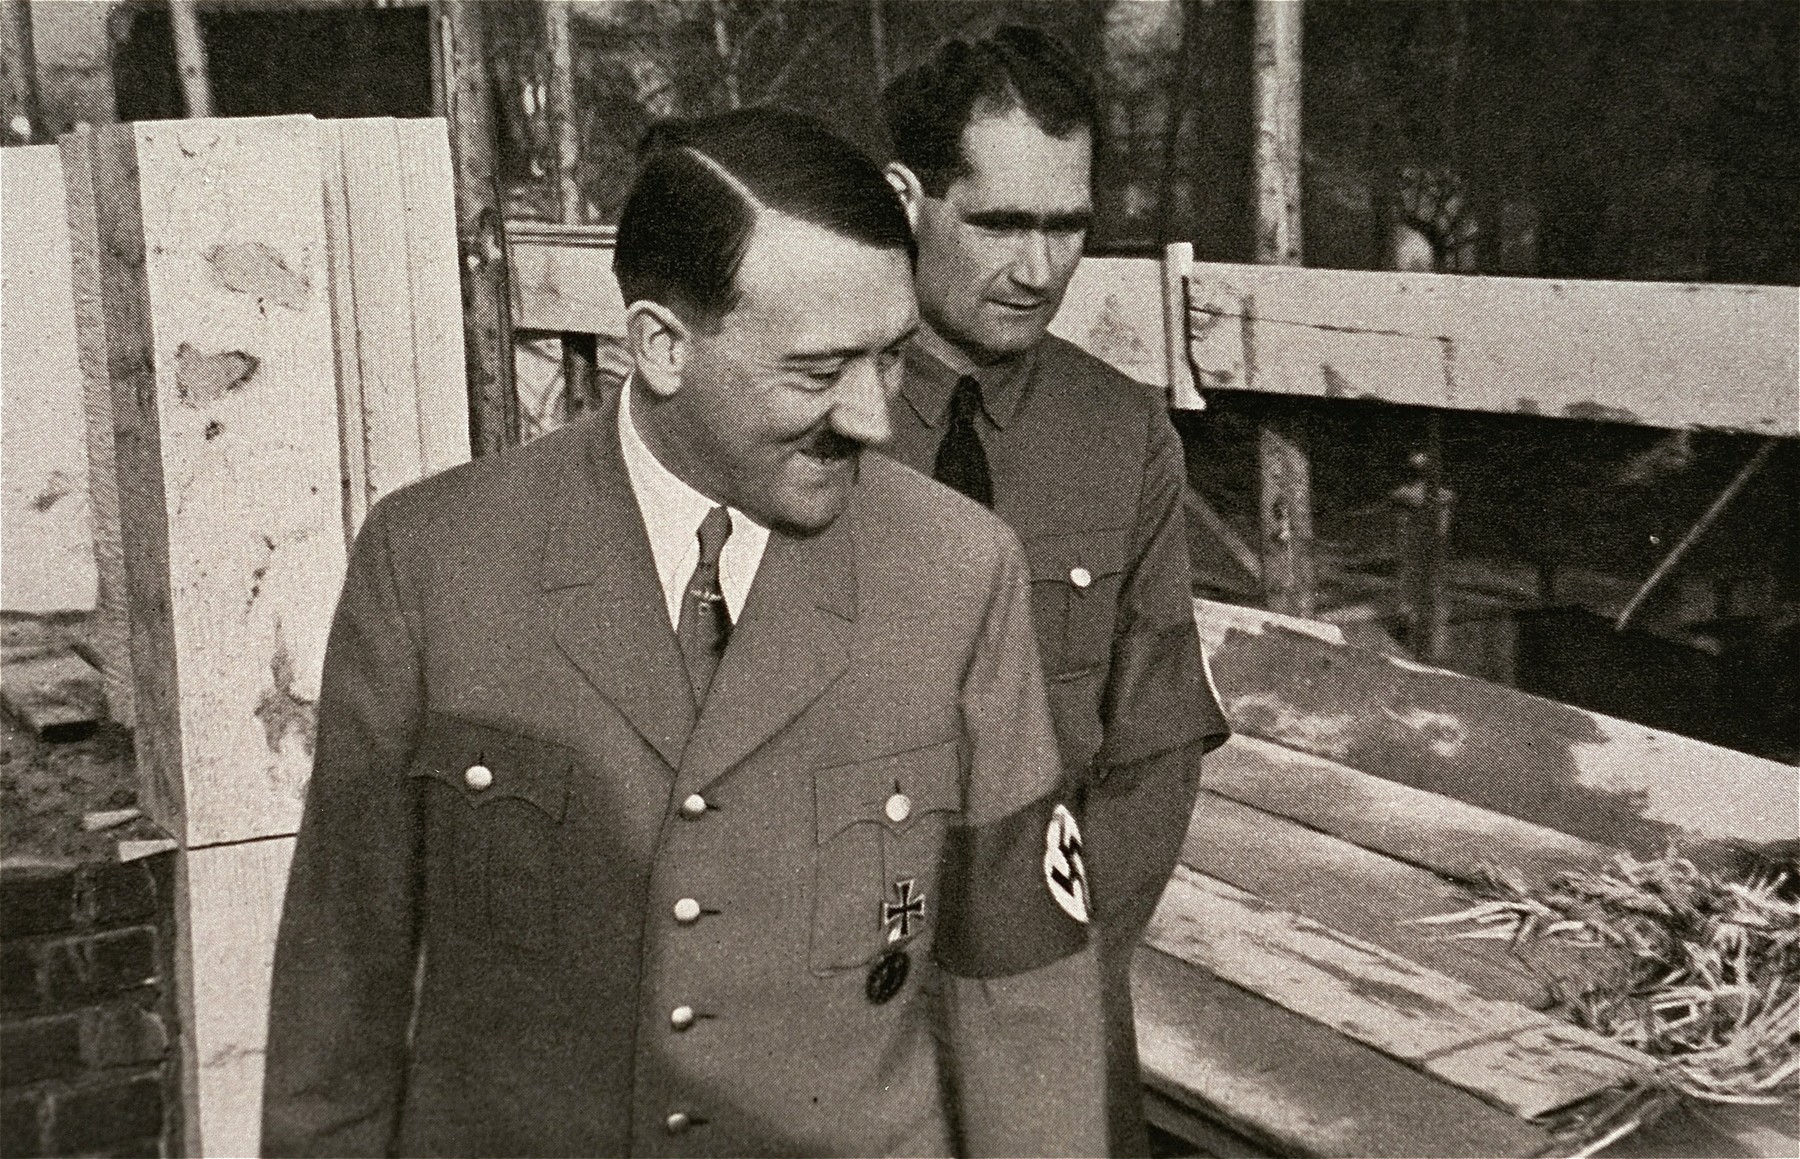 Hitler and Rudolf Hess inspecting the building of the Fuehrer's house in Munich.